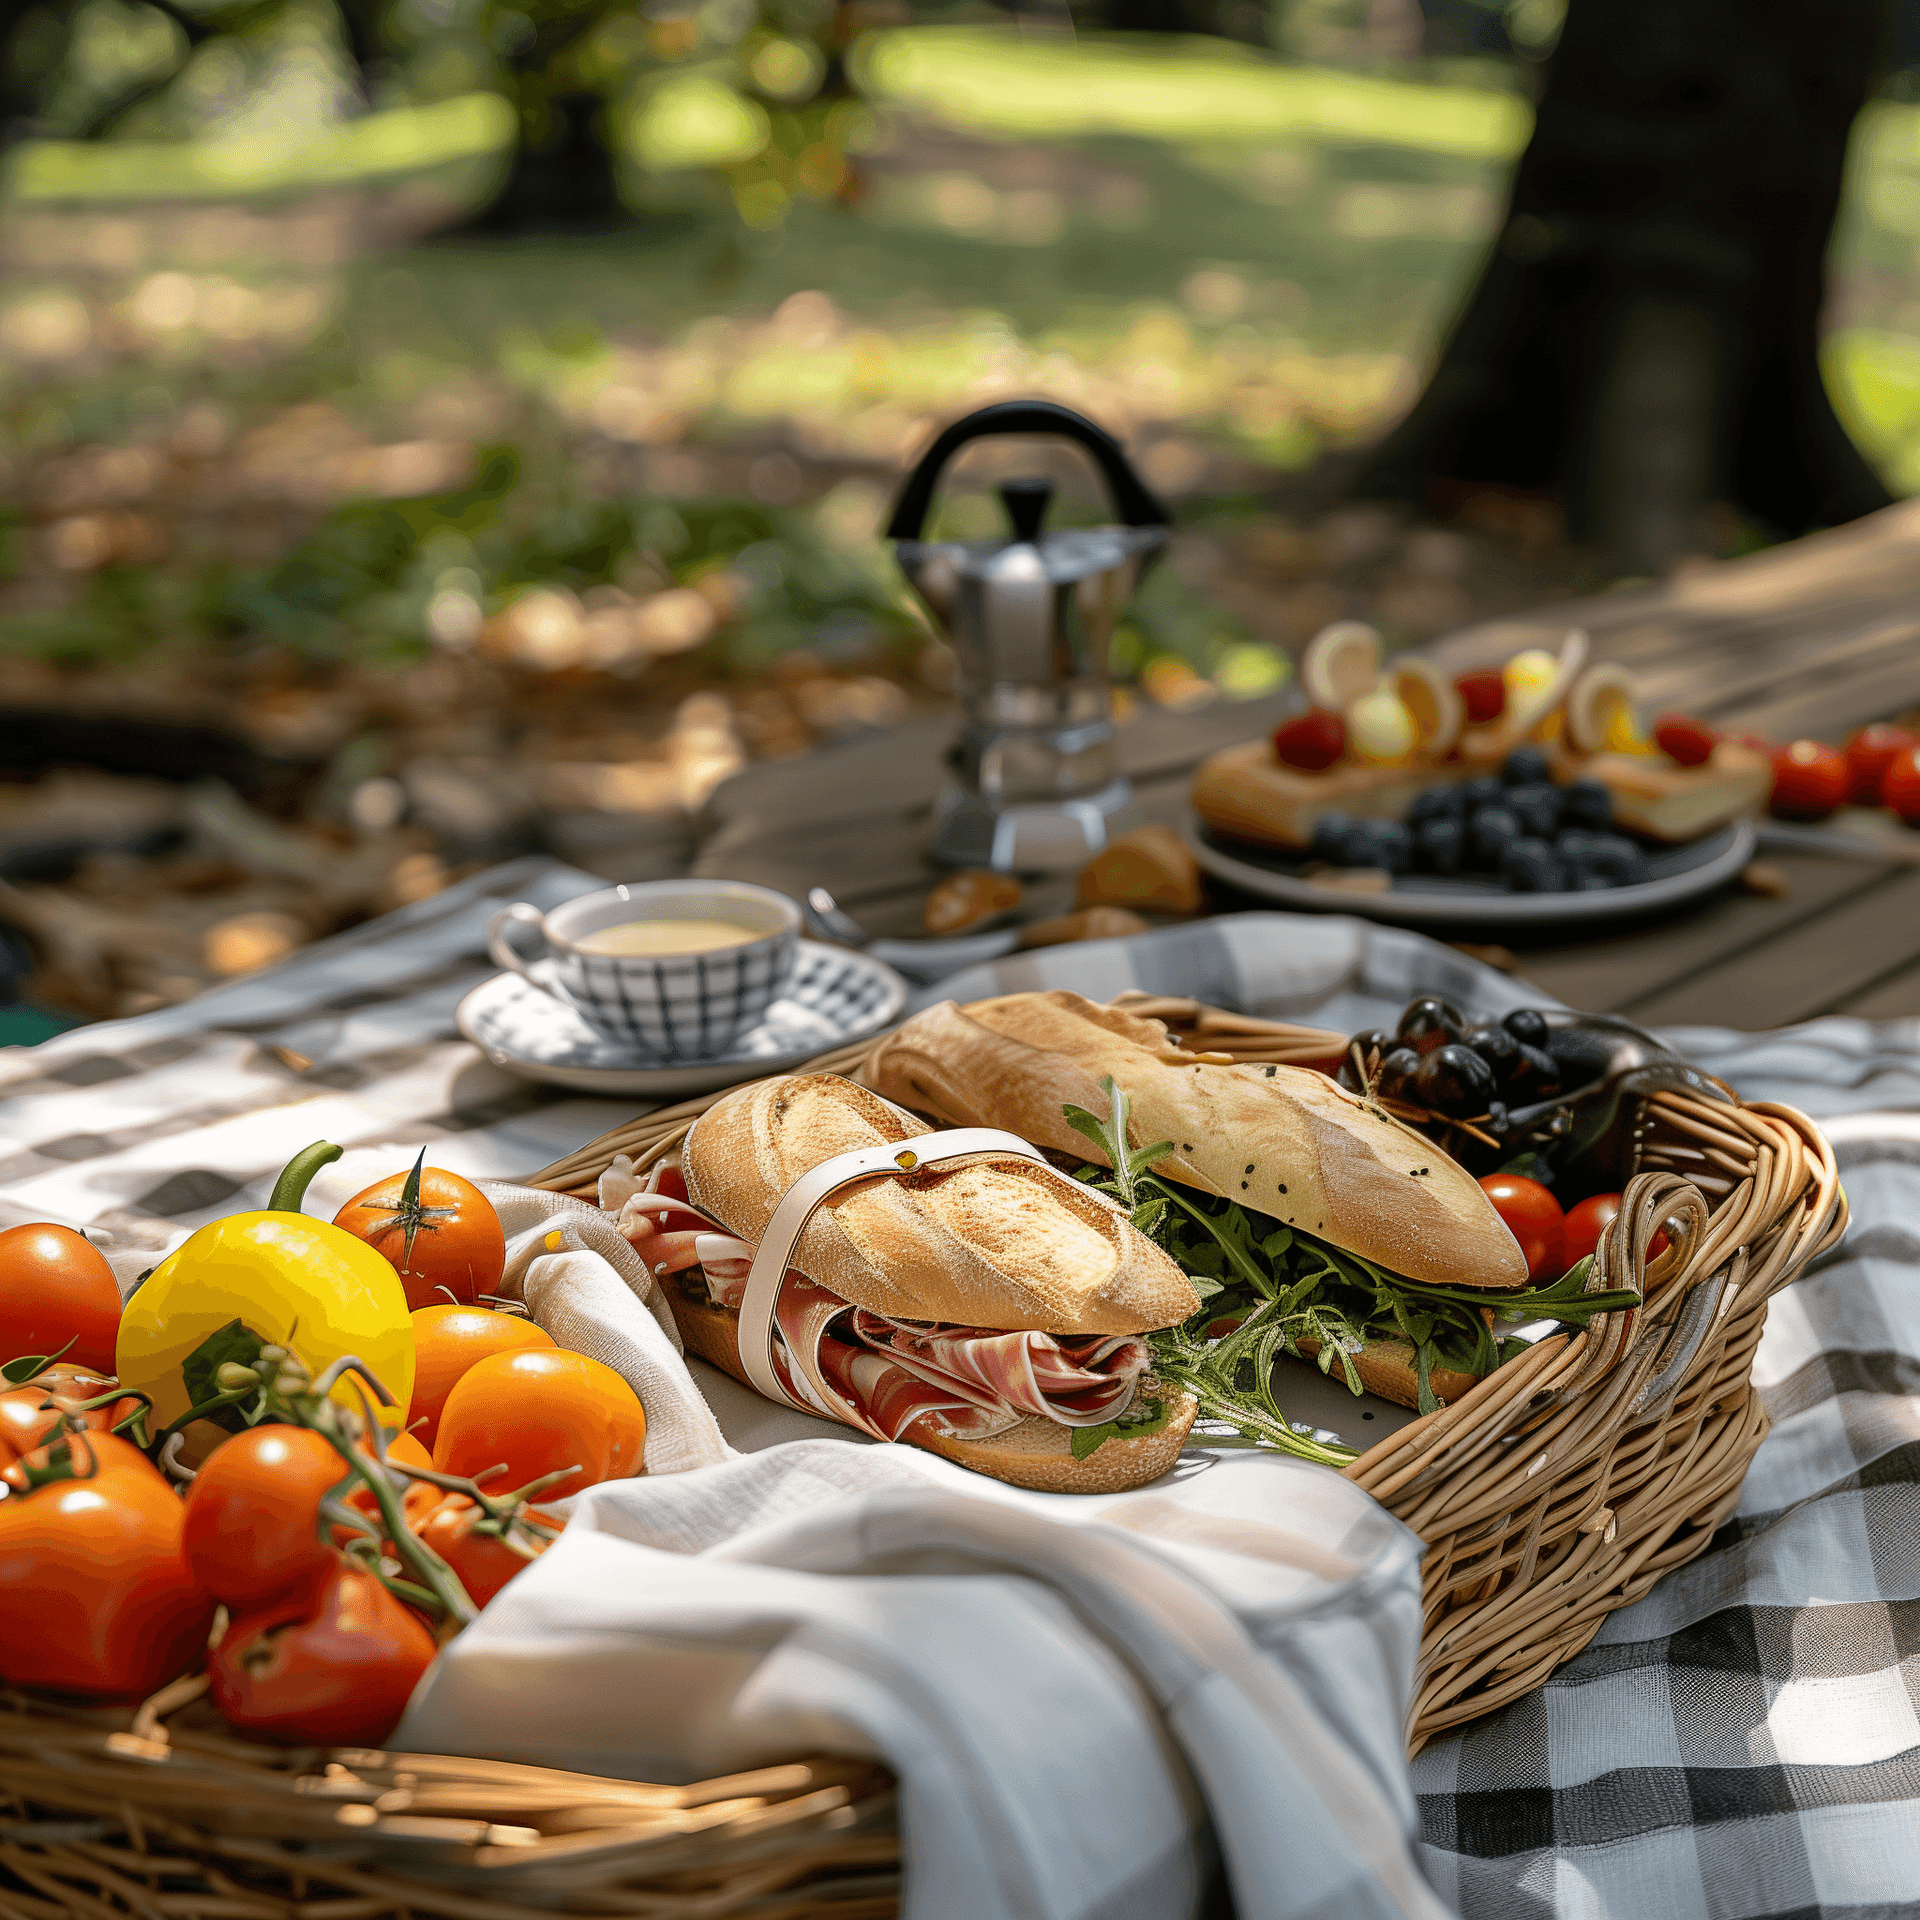 Picnic for two - That one date